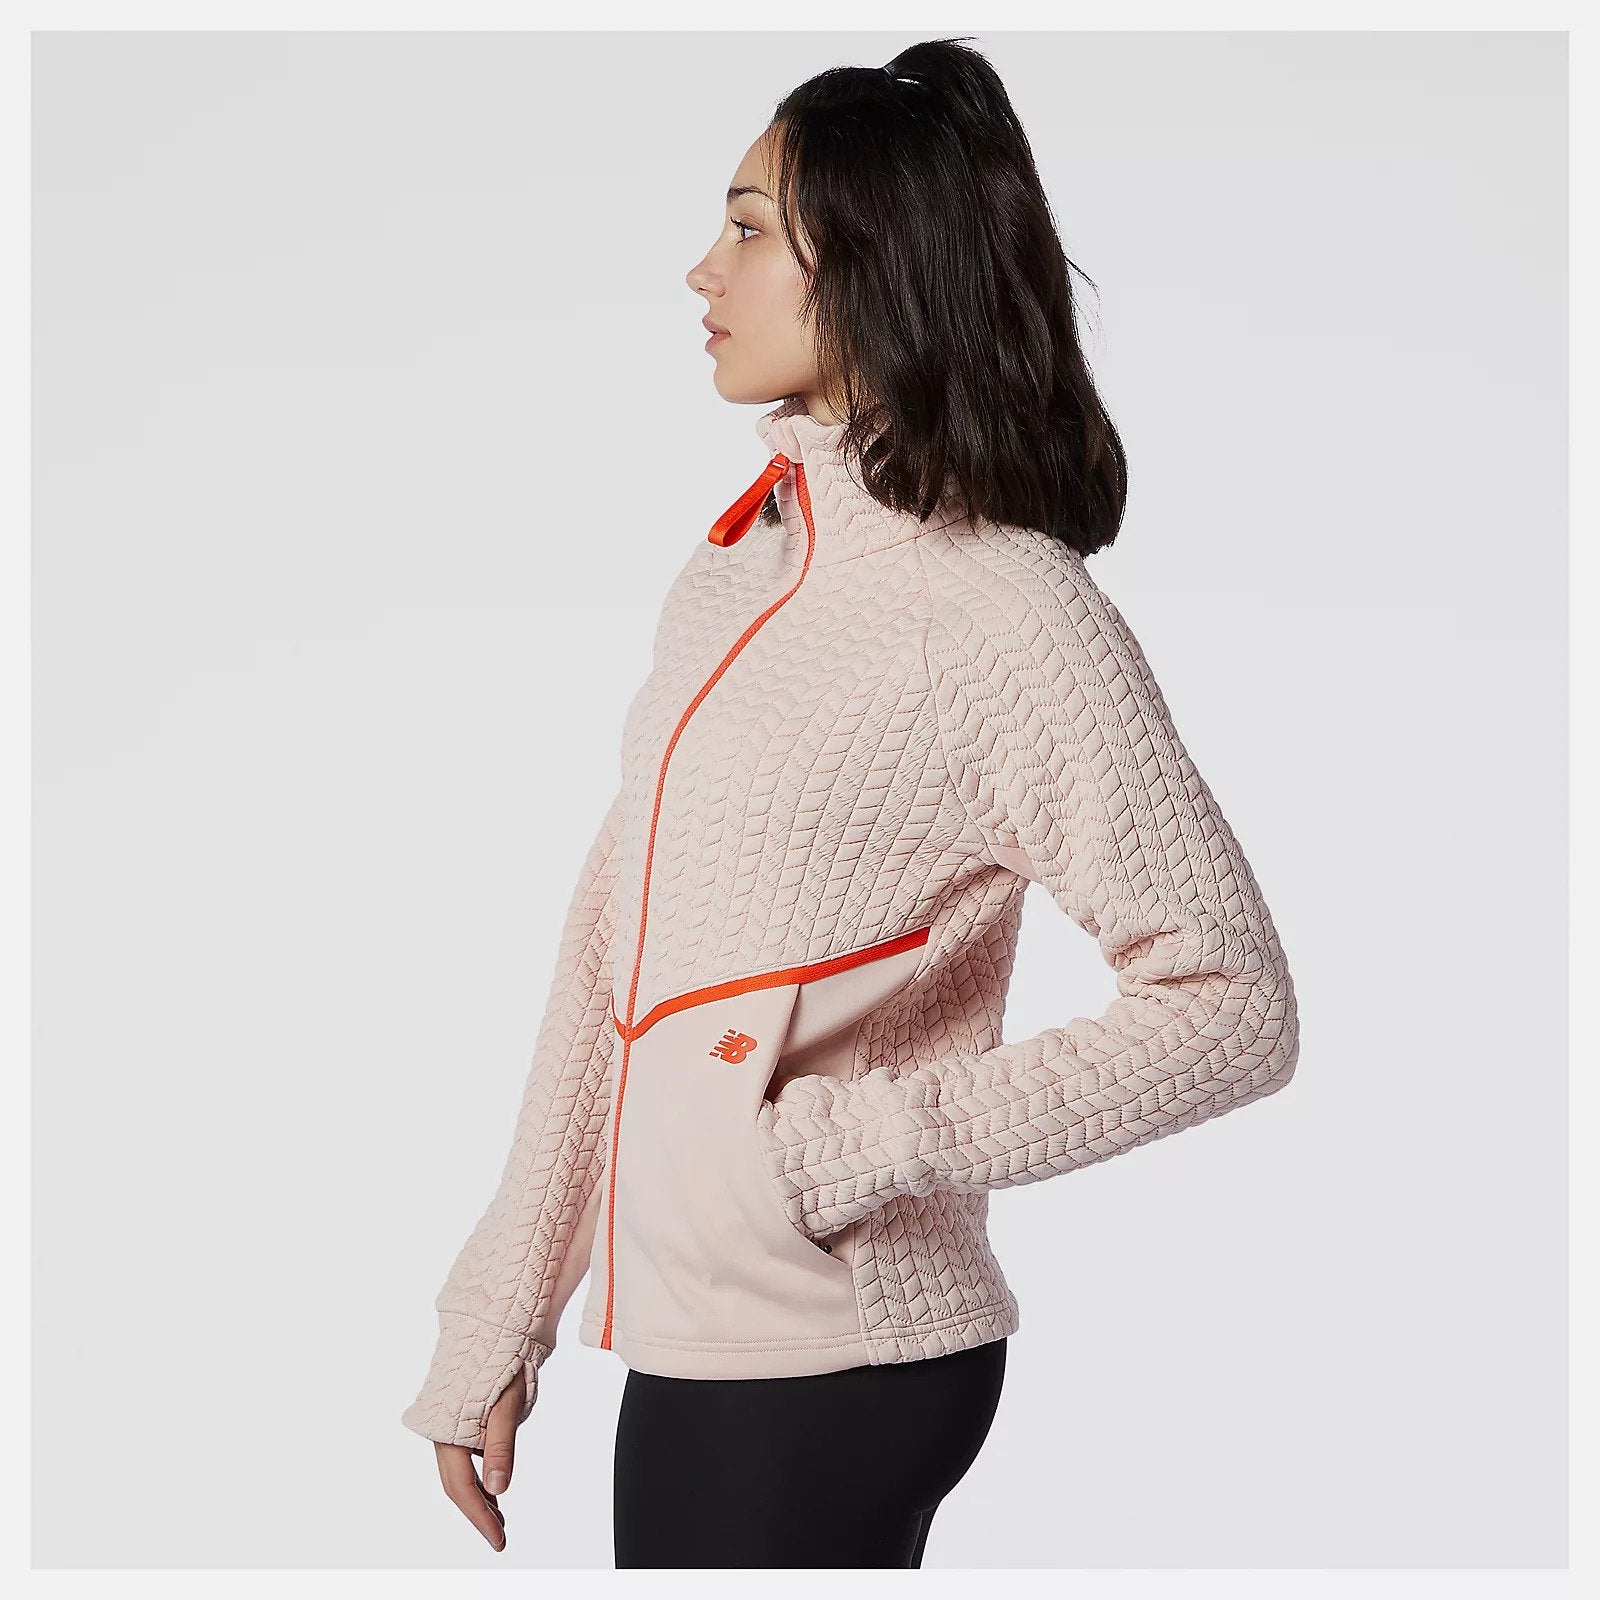 Side view of a model wearing the Women's Heatloft Athletic Jacket in the color Oyster Pink